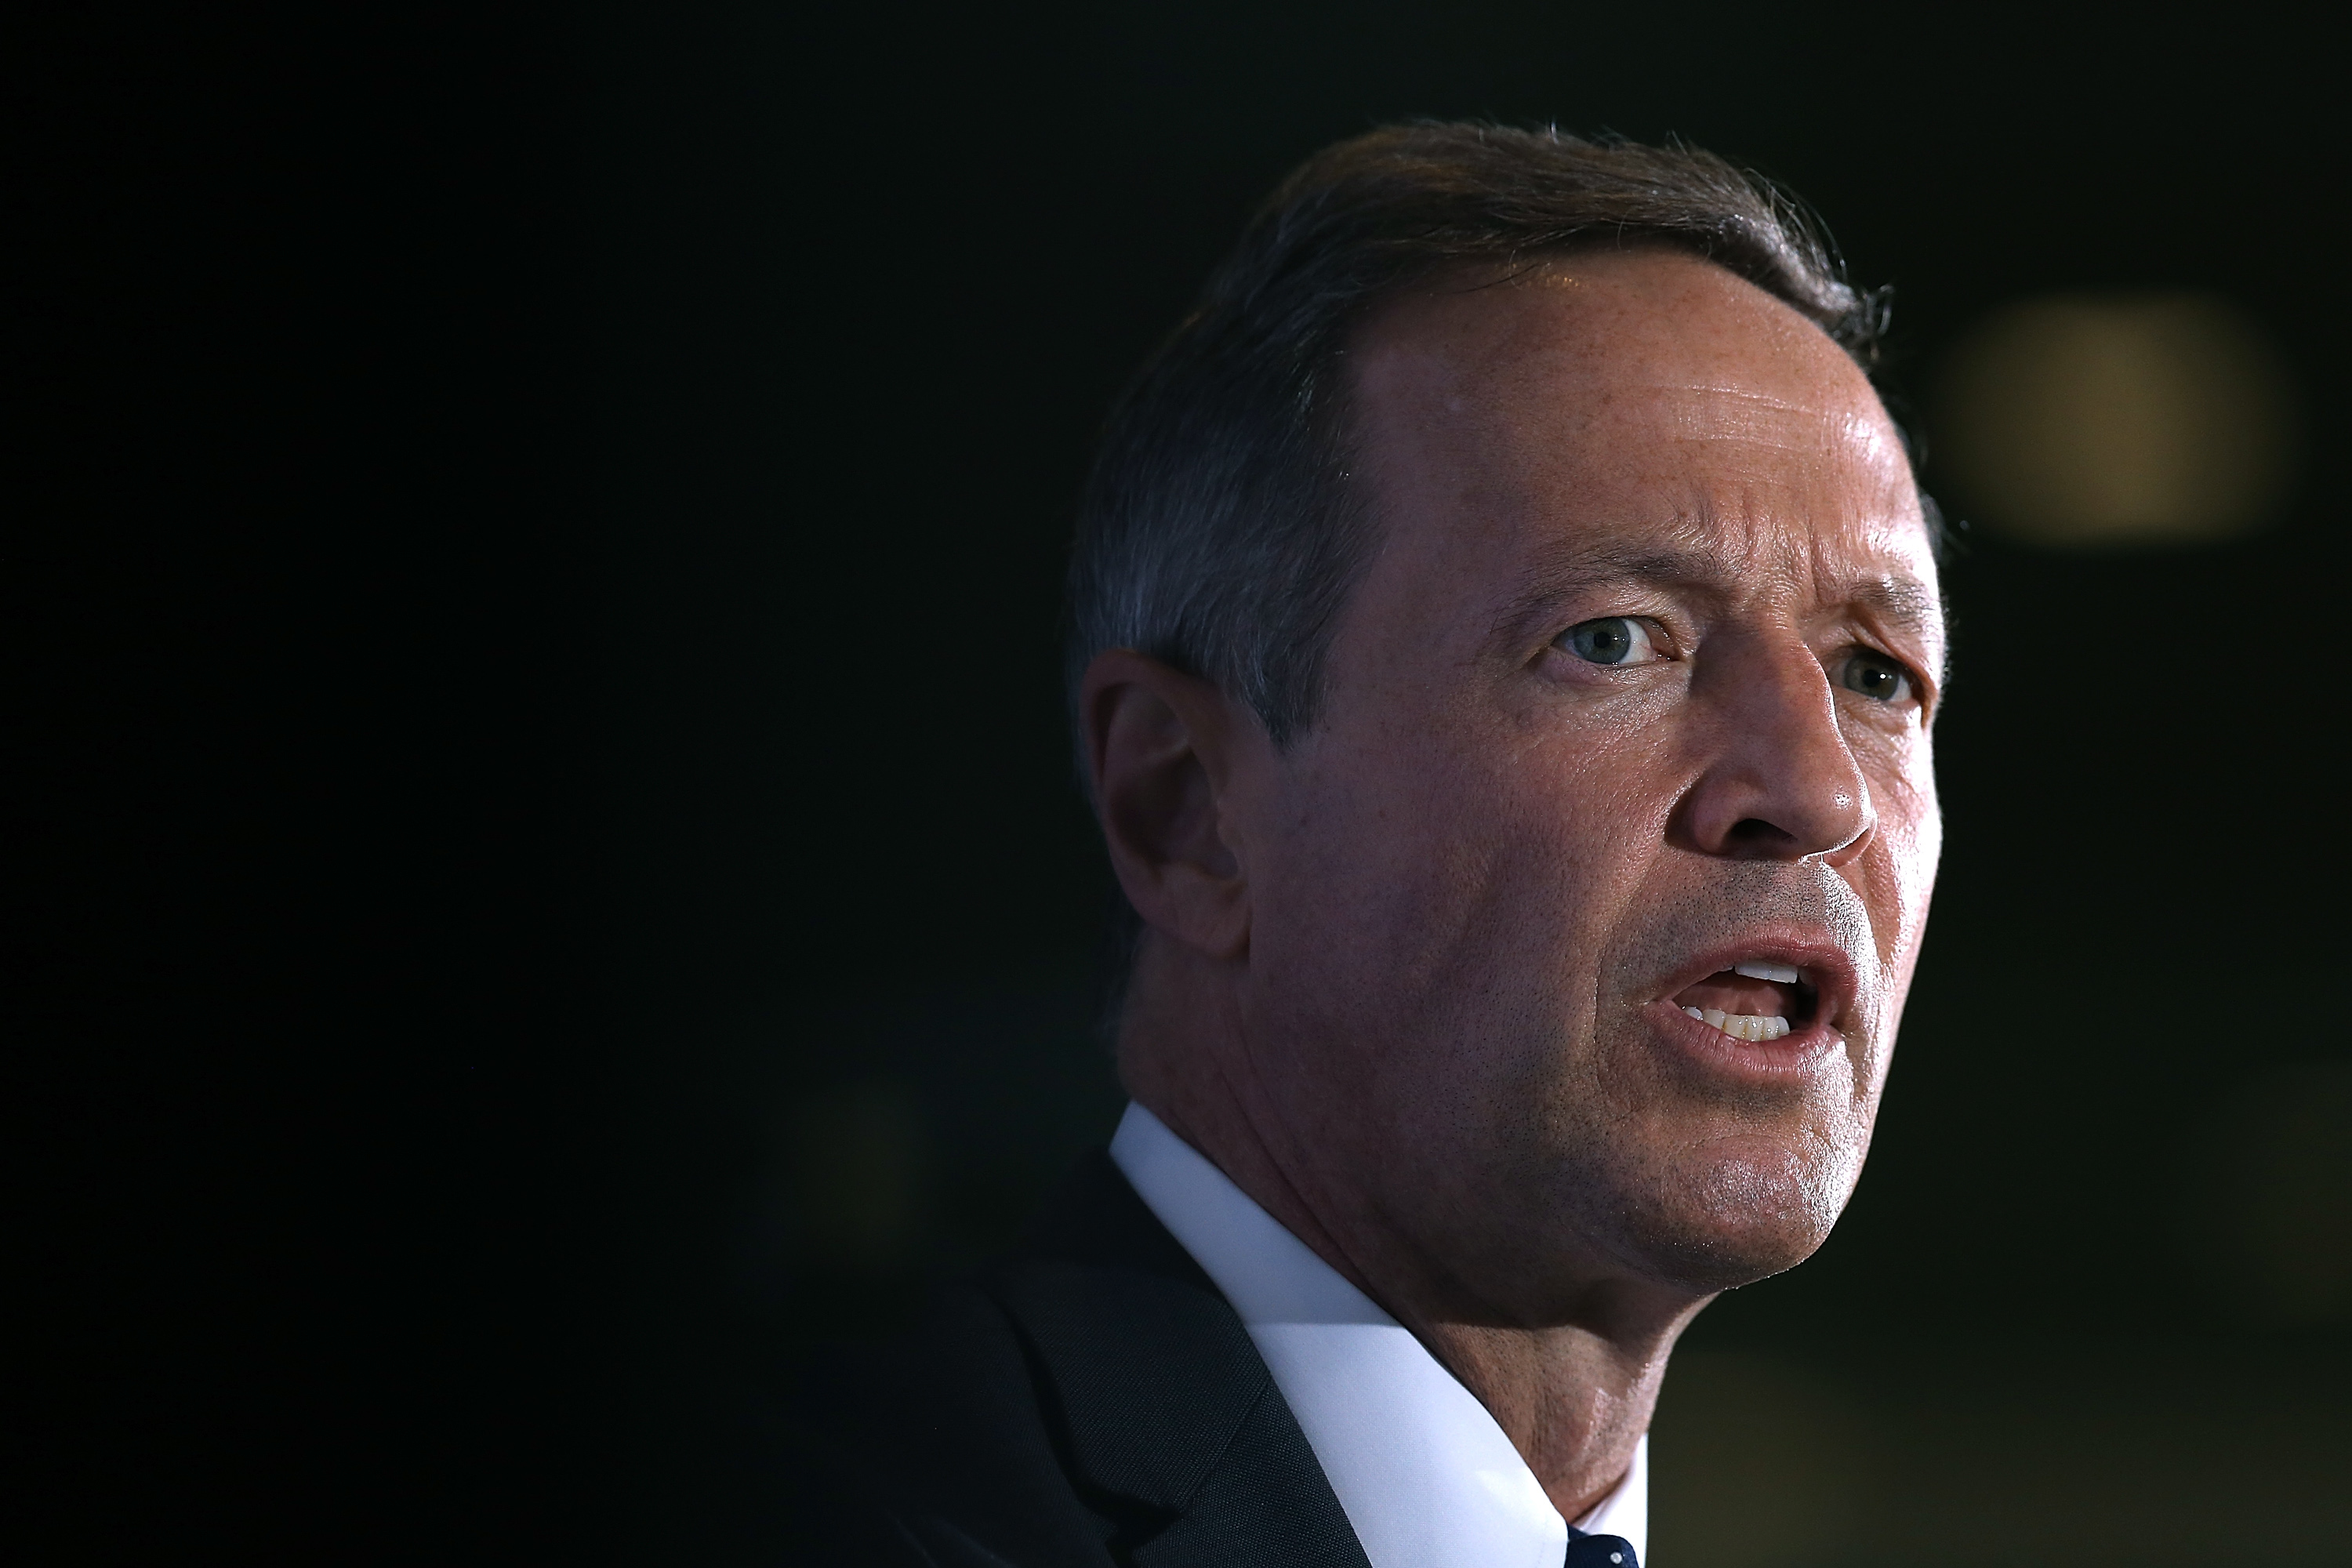 U.S. Democratic presidential candidate and former Maryland Gov. Martin O'Malley speaks at the U.S. Hispanic Chamber of Commerce June 3, 2015 in Washington, DC. (Win McNamee&mdash;Getty Images)